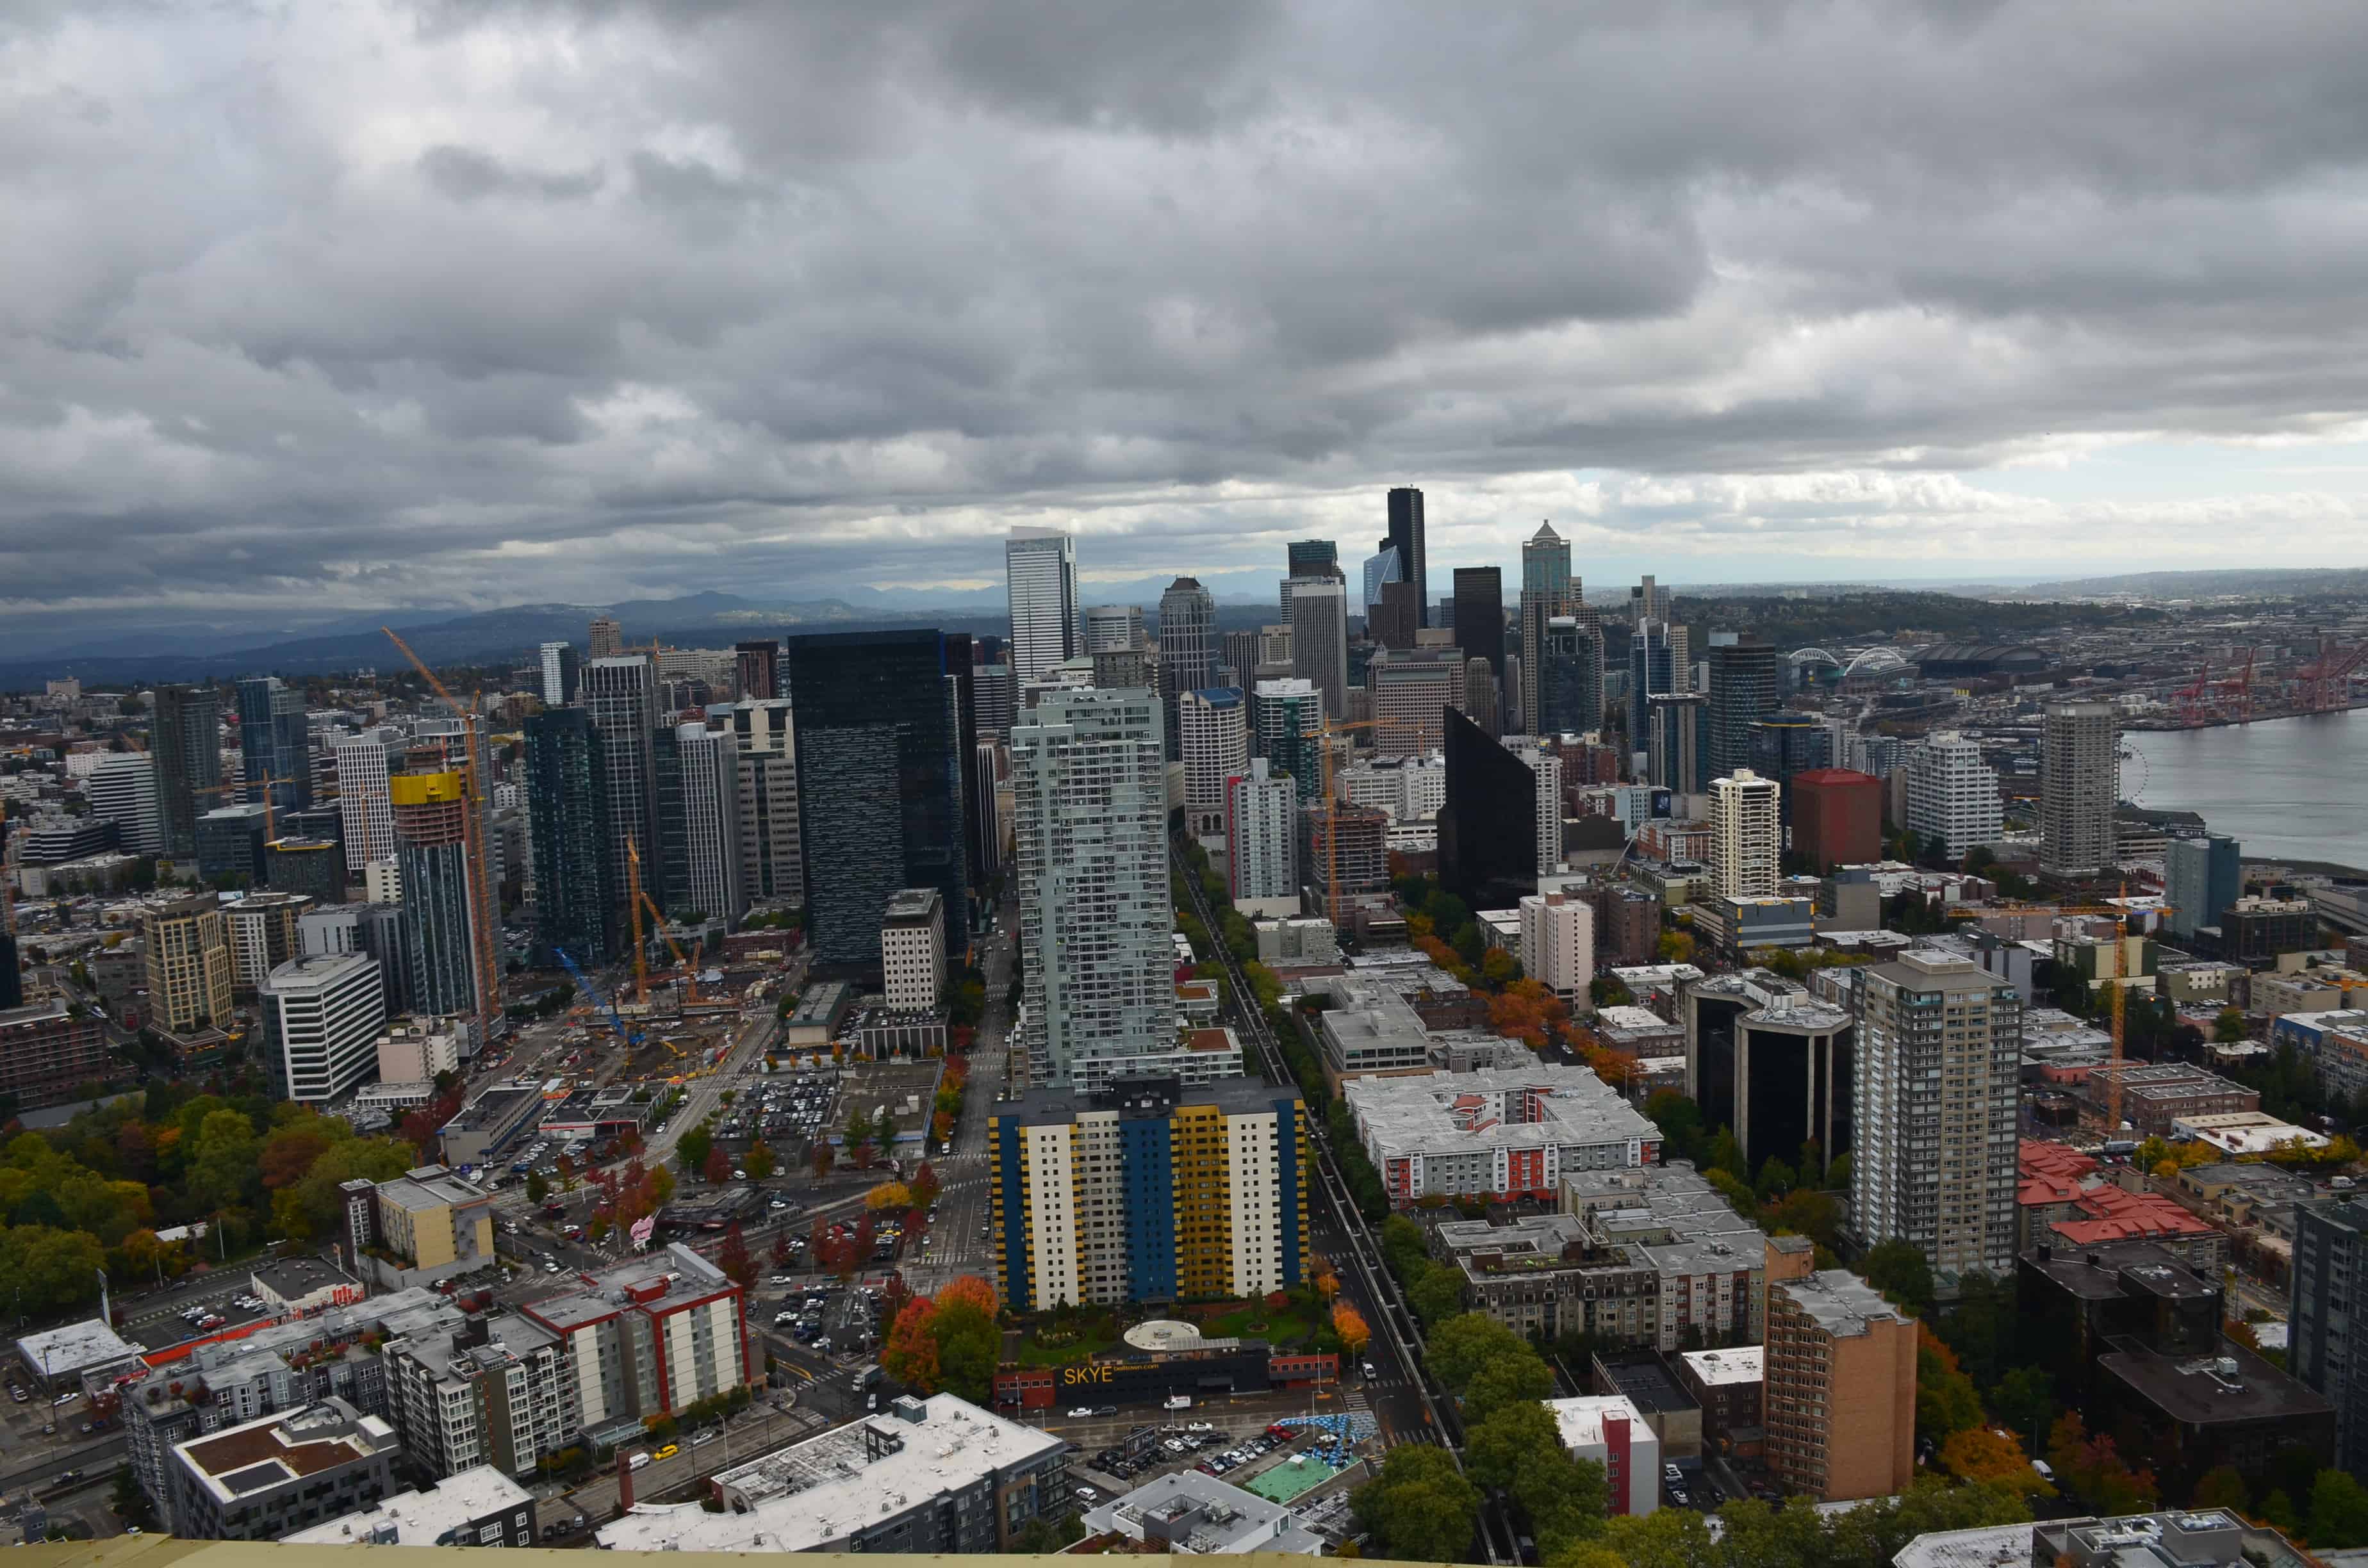 Seattle skyline from the Space Needle in Seattle, Washington